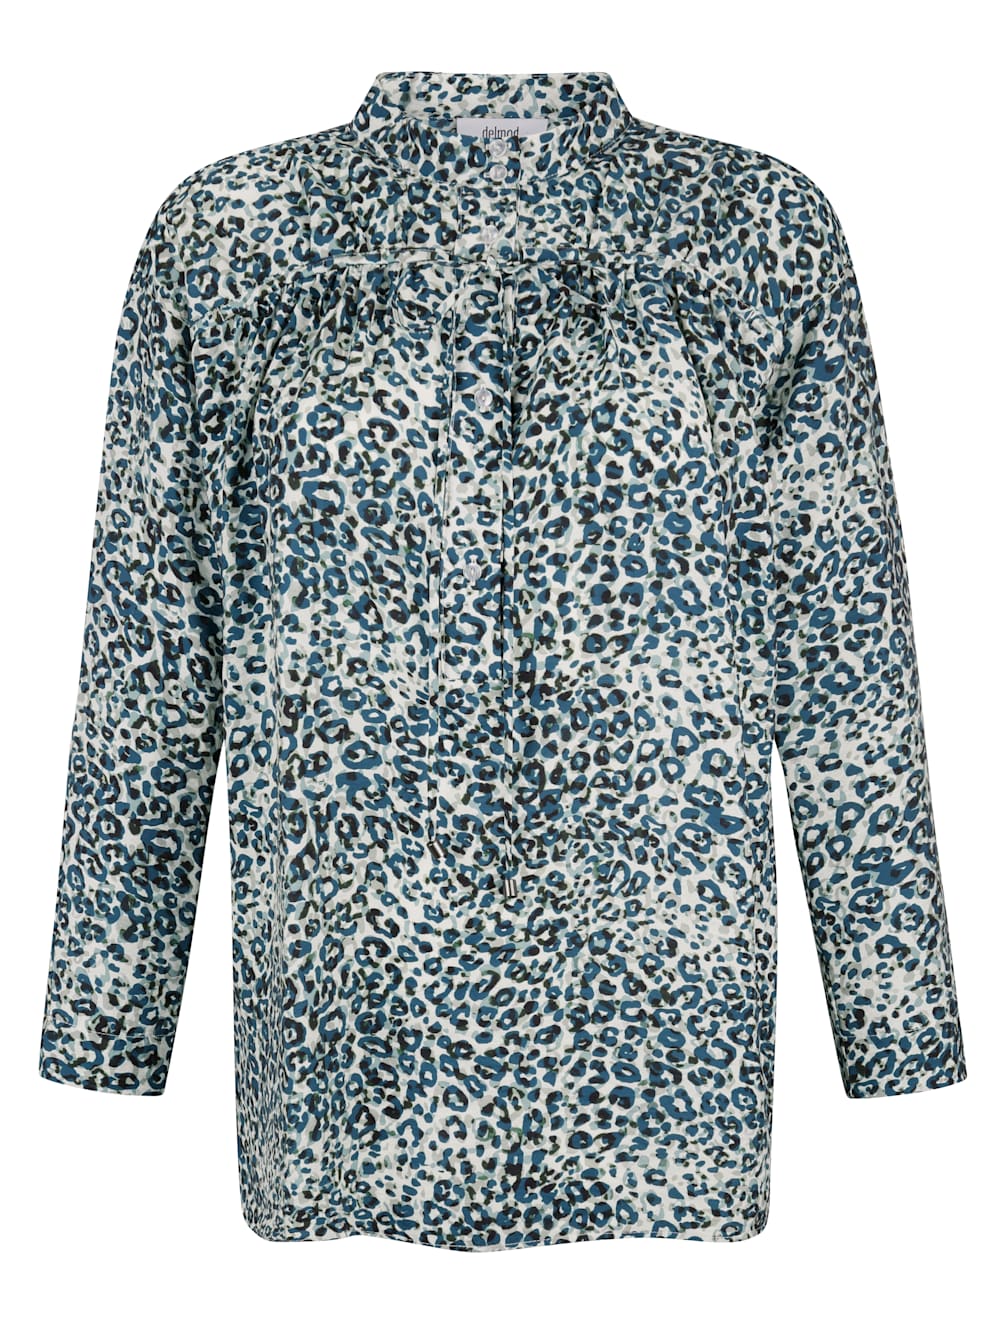 Delmod pure Bluse in tollem Leo-Muster | Meyer Mode